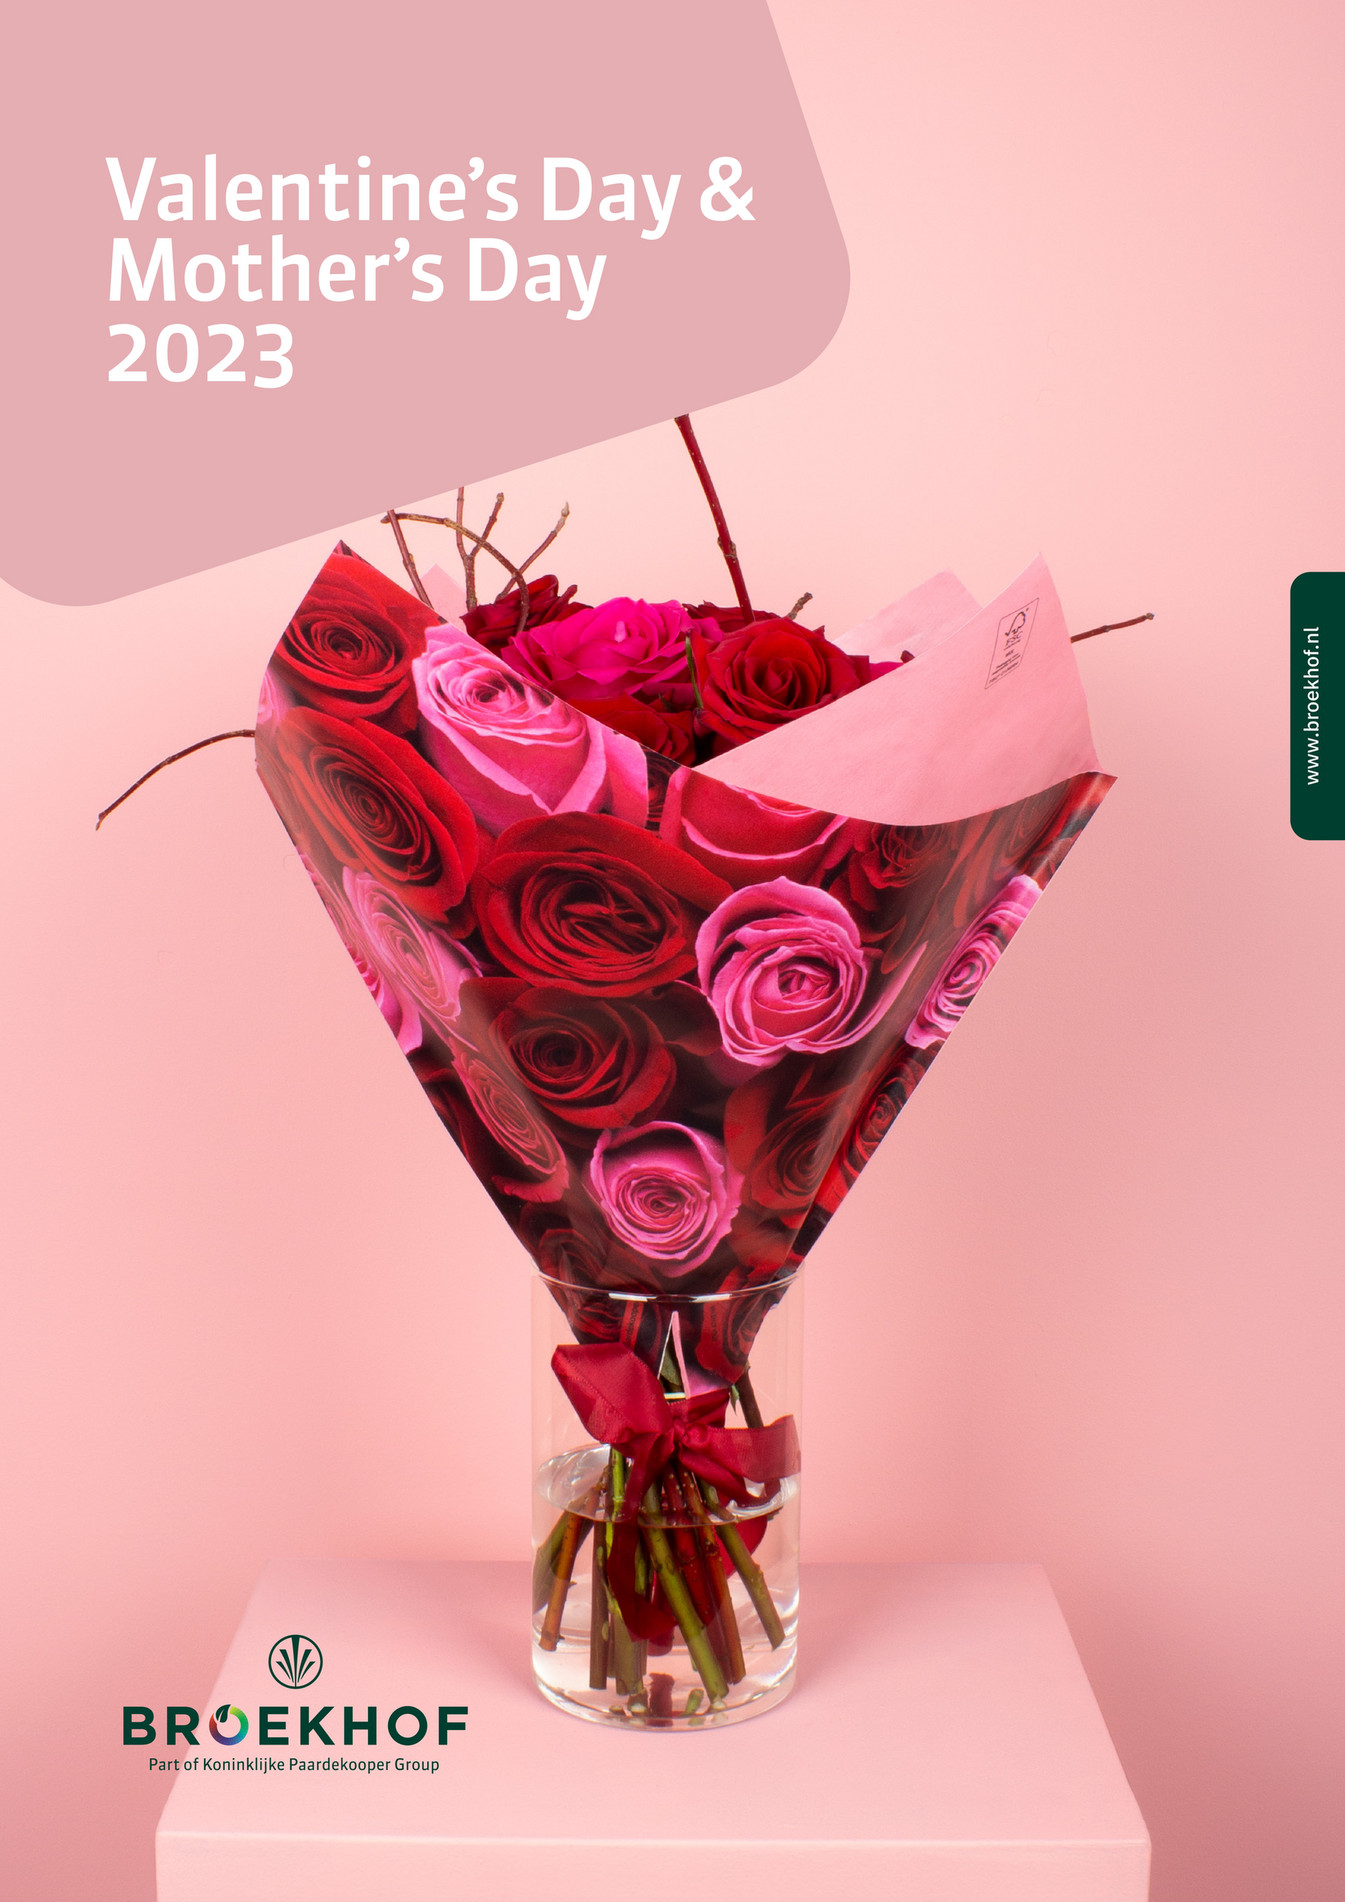 broekhof-brochure-valentine-s-day-and-mother-s-day-2023-page-10-11